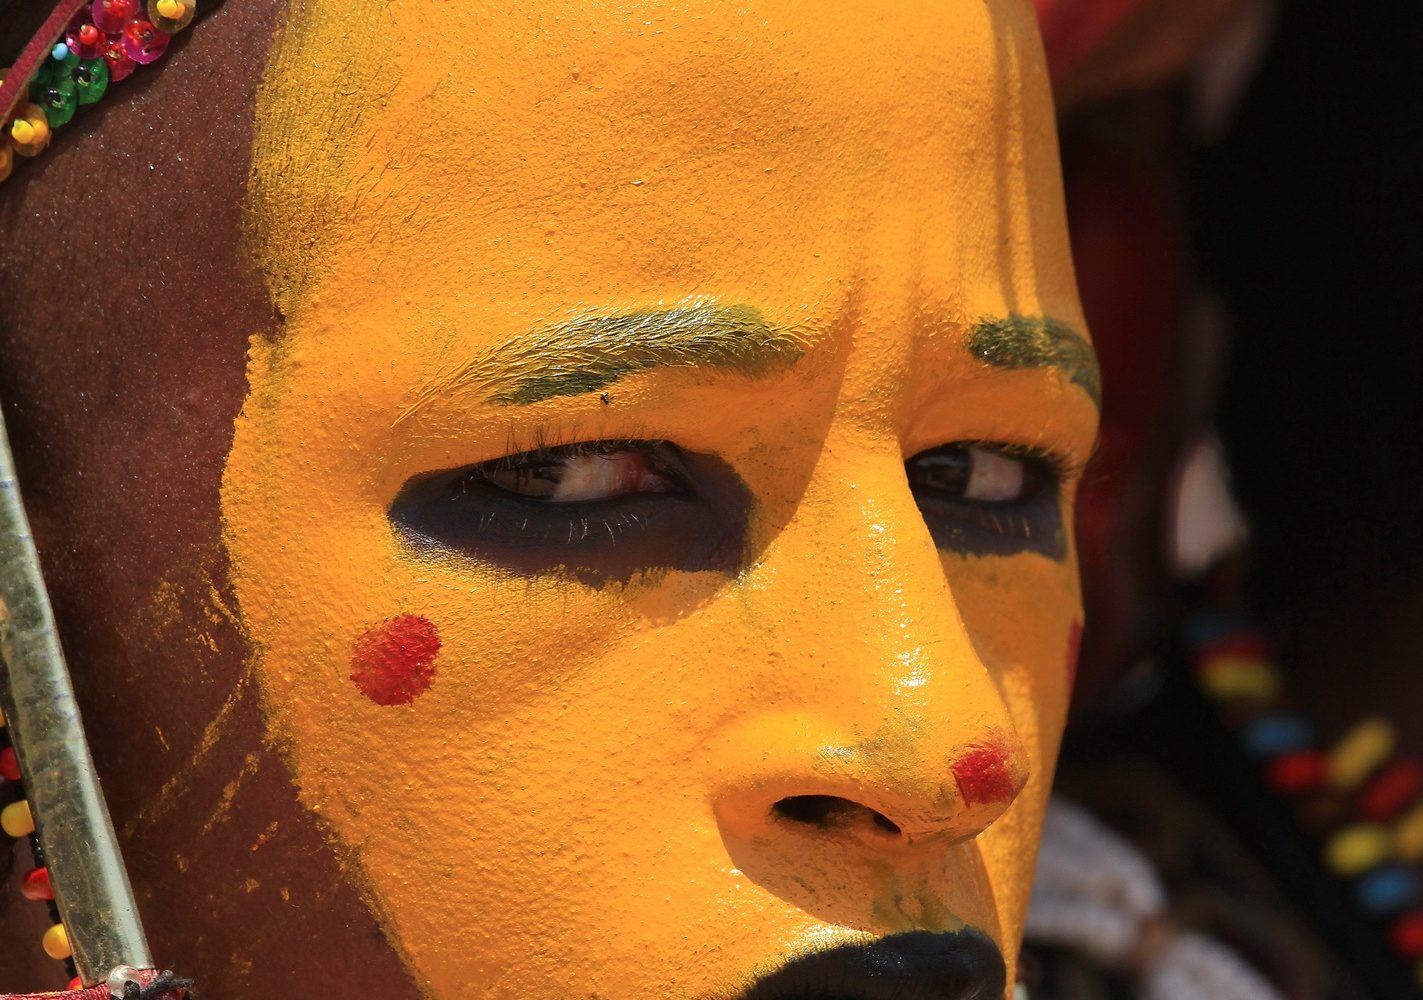 painted face niger photo tour